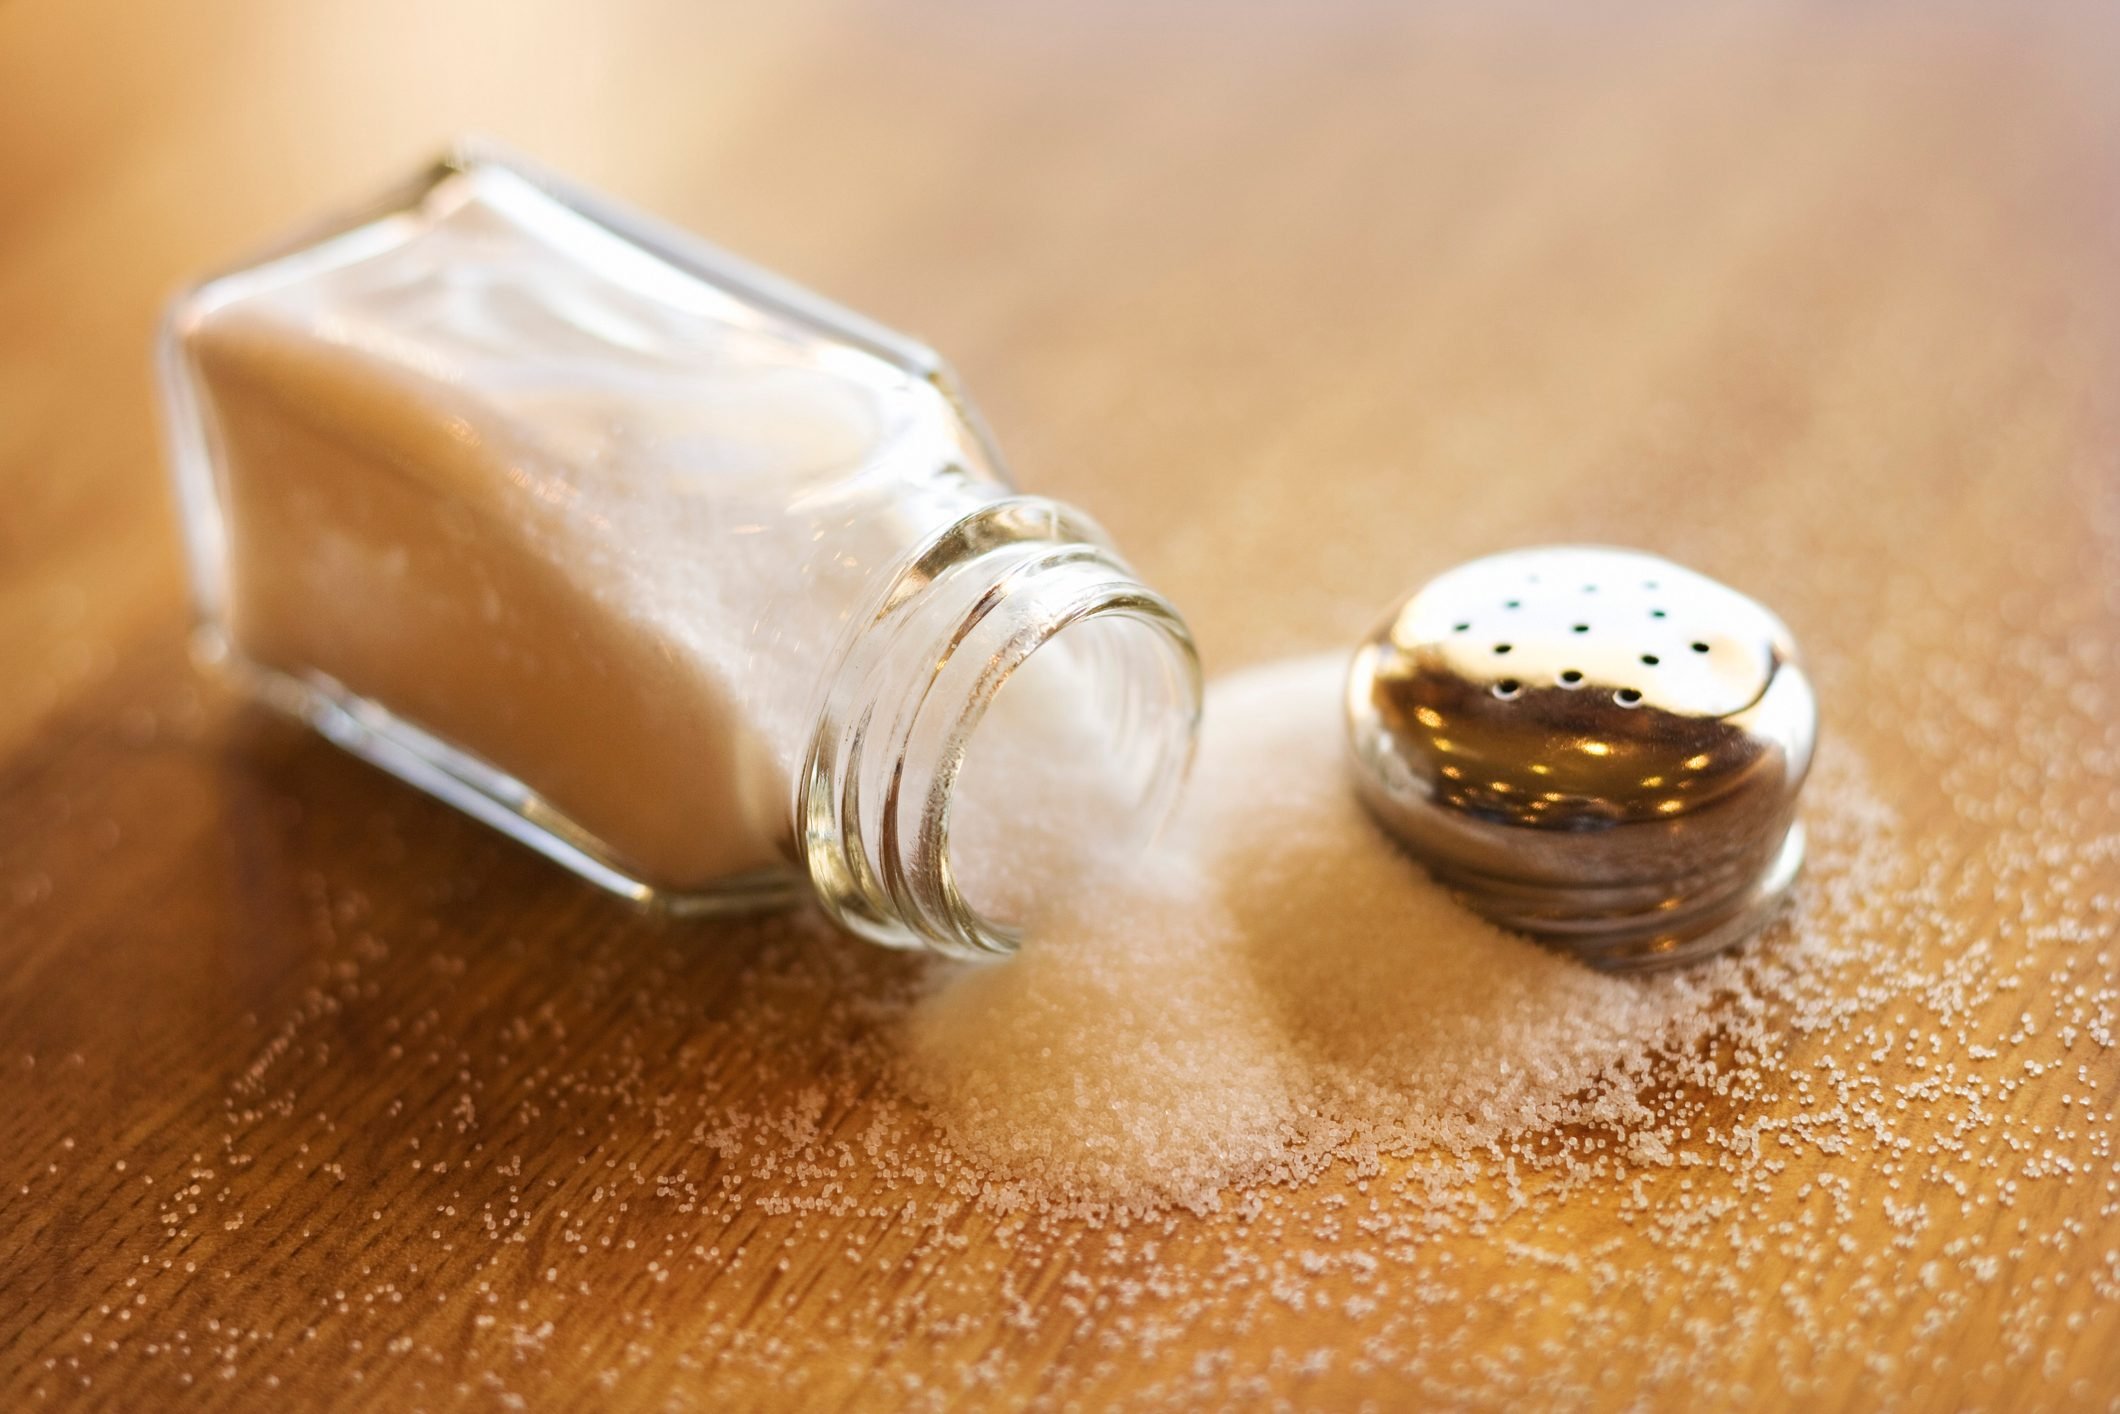 Why Do We Take Things with a Grain of Salt?